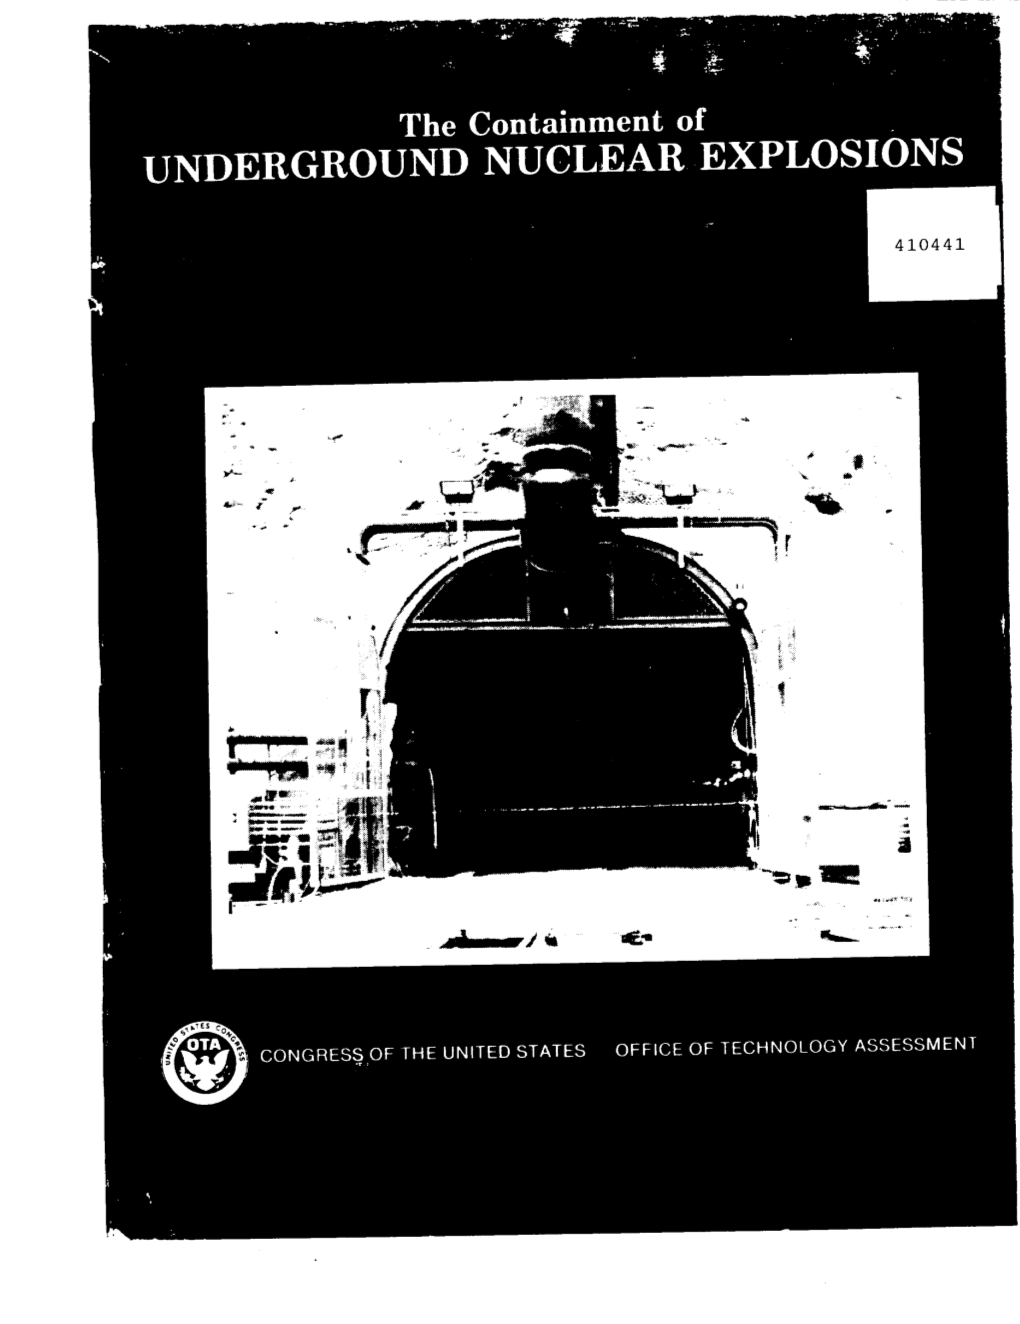 The Containment of UNDERGROUND NUCLEAR EXPLOSIONS